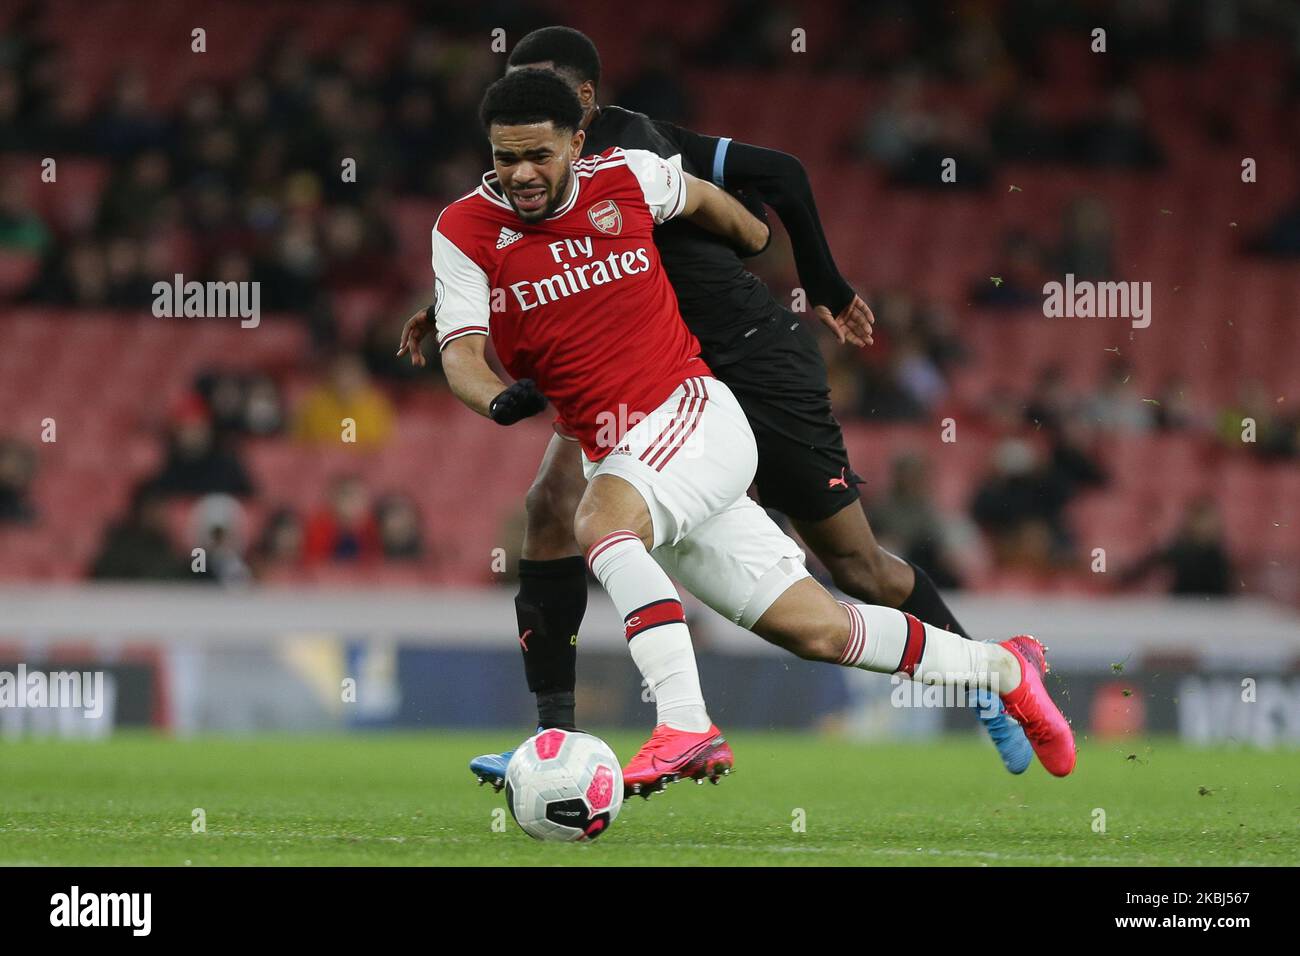 Trae Coyle of Arsenal u23 in action during the Premier League 2 match between Arsenal Under 23 and Manchester City Under 23 at the Emirates Stadium, London on Saturday 29th February 2020. (Photo by Jacques Feeney/MINews/NurPhoto) Stock Photo